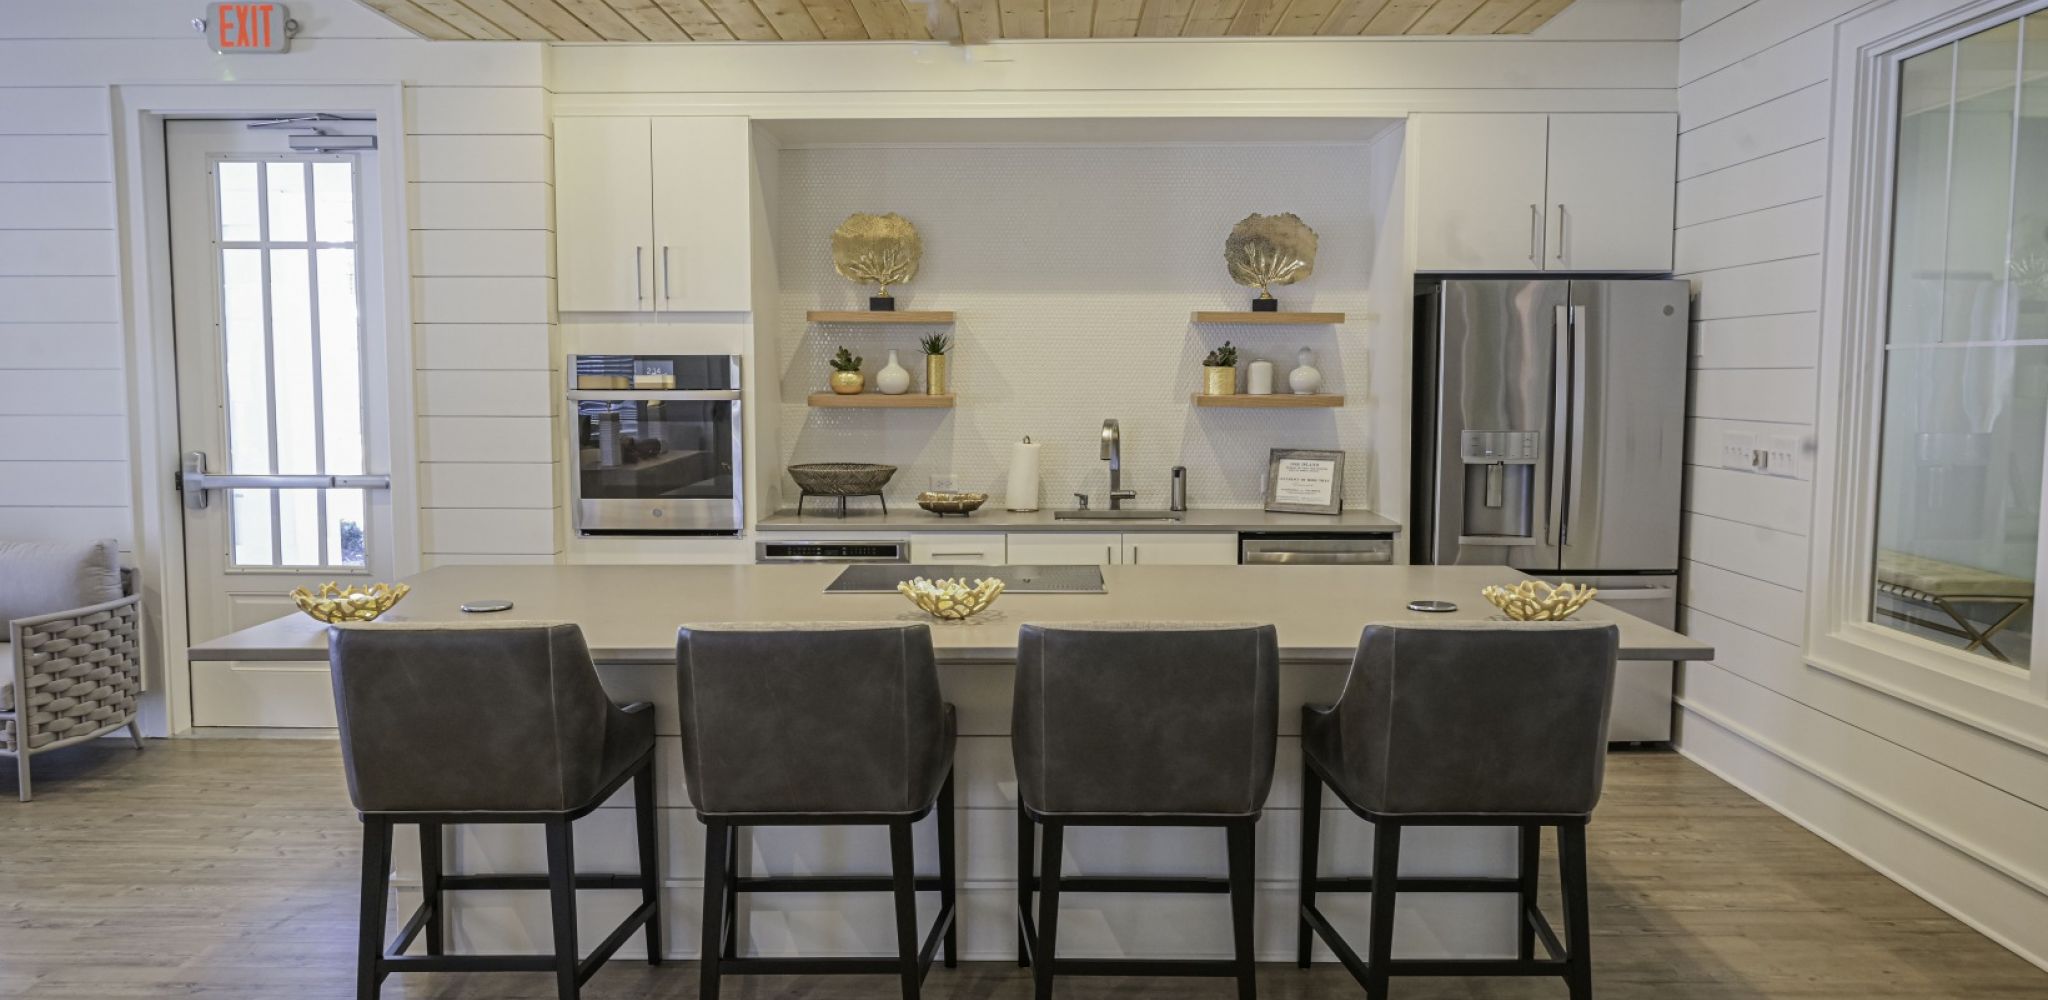 Hawthorne at Pine Forest resident amenity area with large island with chairs, stainless steel appliances, and a large sink